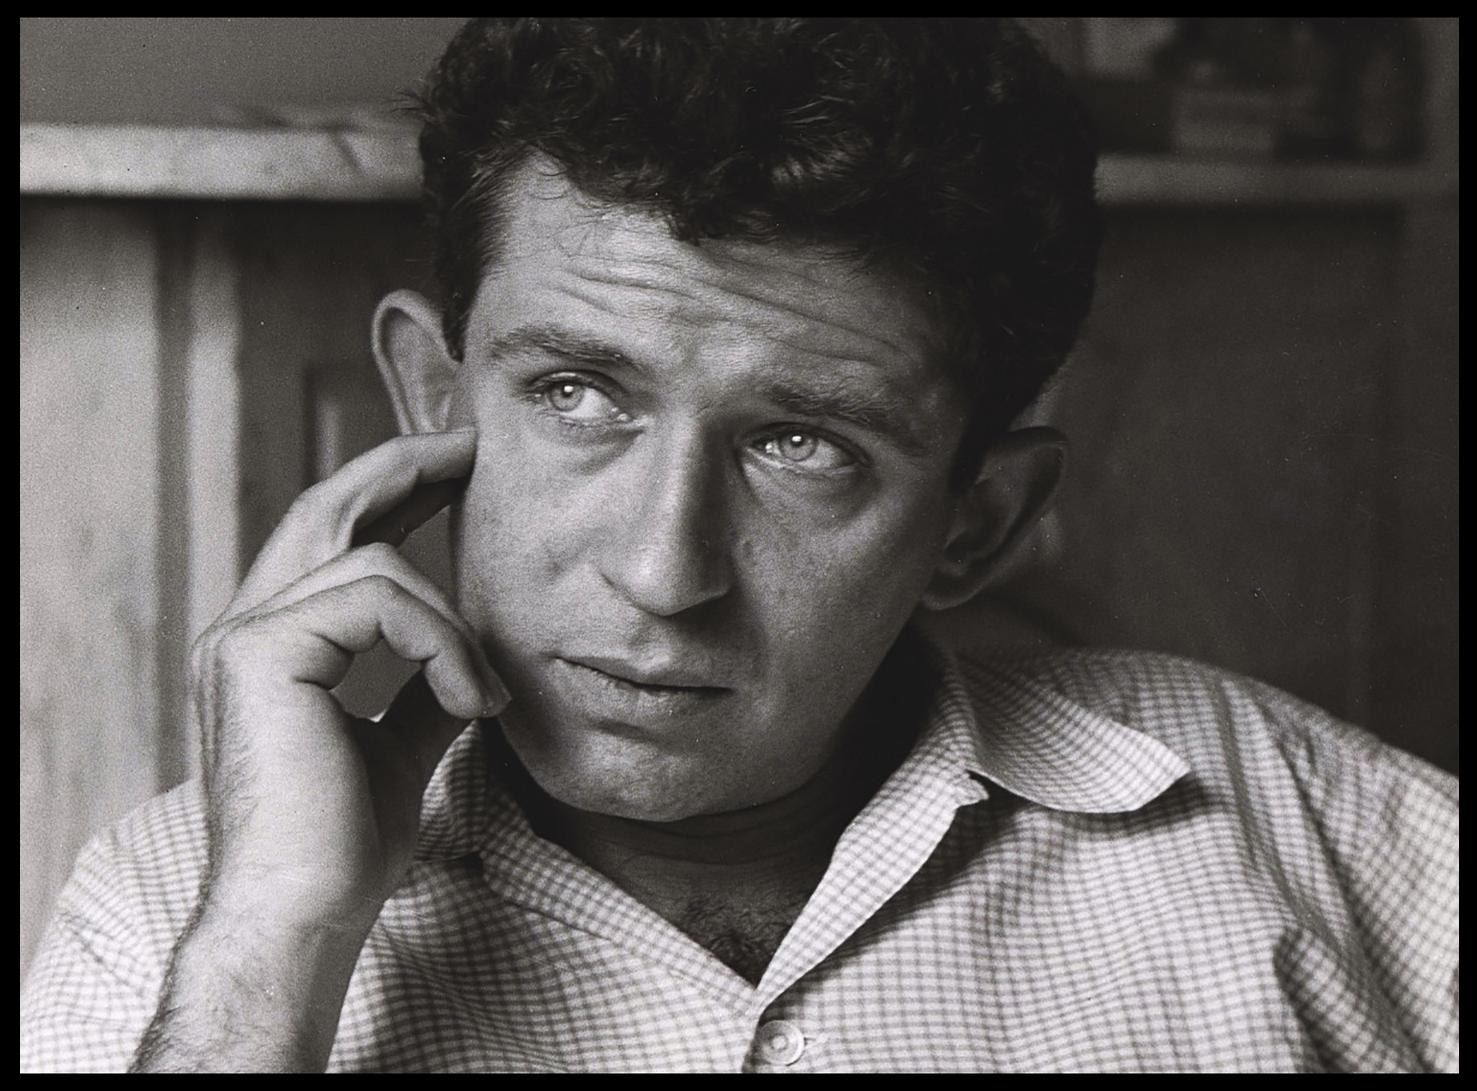 Zeitgeist Films in Association With Kino Lorber Acquires North American Rights to Jeff Zimbalist’s Doc 'How to Come Alive With Norman Mailer'